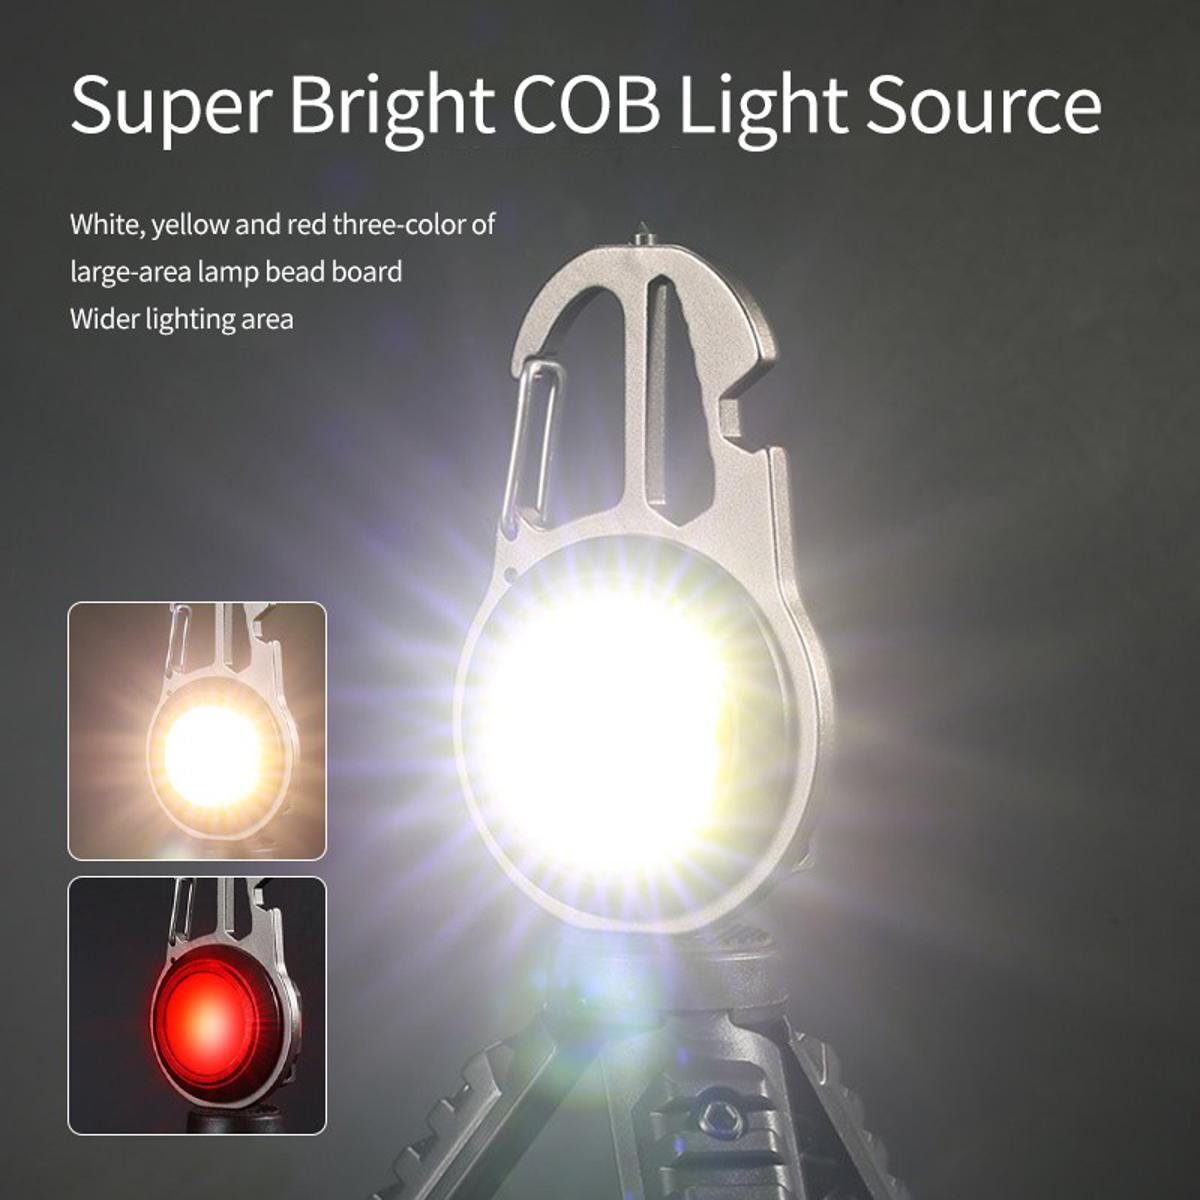 Best Working ﻿Mini 6 IN 1 Work Light 500 lumens Portable COB Pocket light Multifunctional Glare COB Keychain Light USB Charging Lamps Strong Magnetic Repair Work Outdoor Camping Light